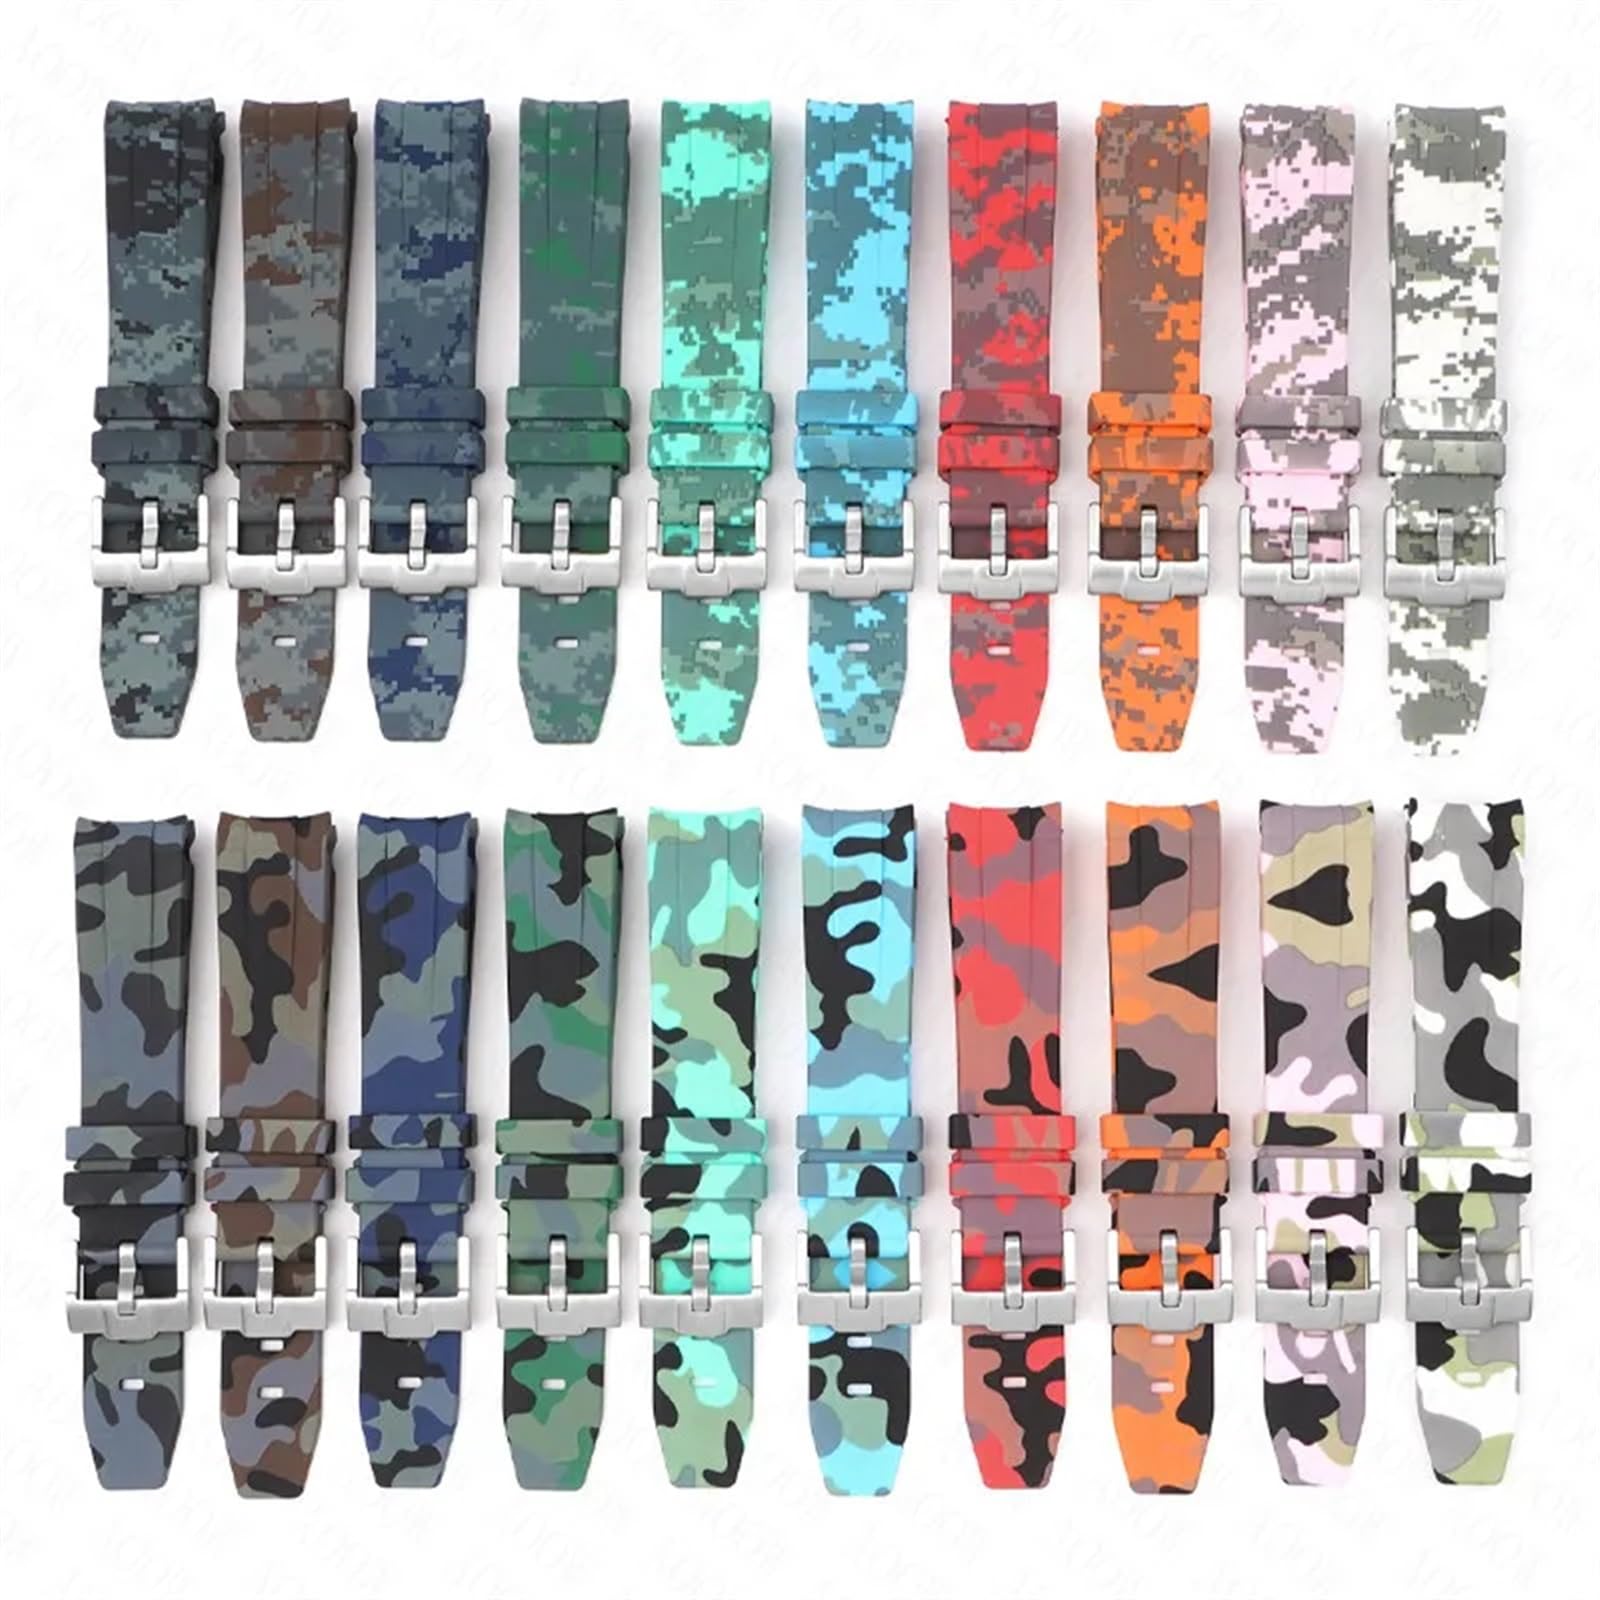 KGFCE Camouflage Strap for Omega for Swatch MoonSwatch Curved End Silicone Rubber Bracelet Men Women Sport Watch Band Accessorie 20mm